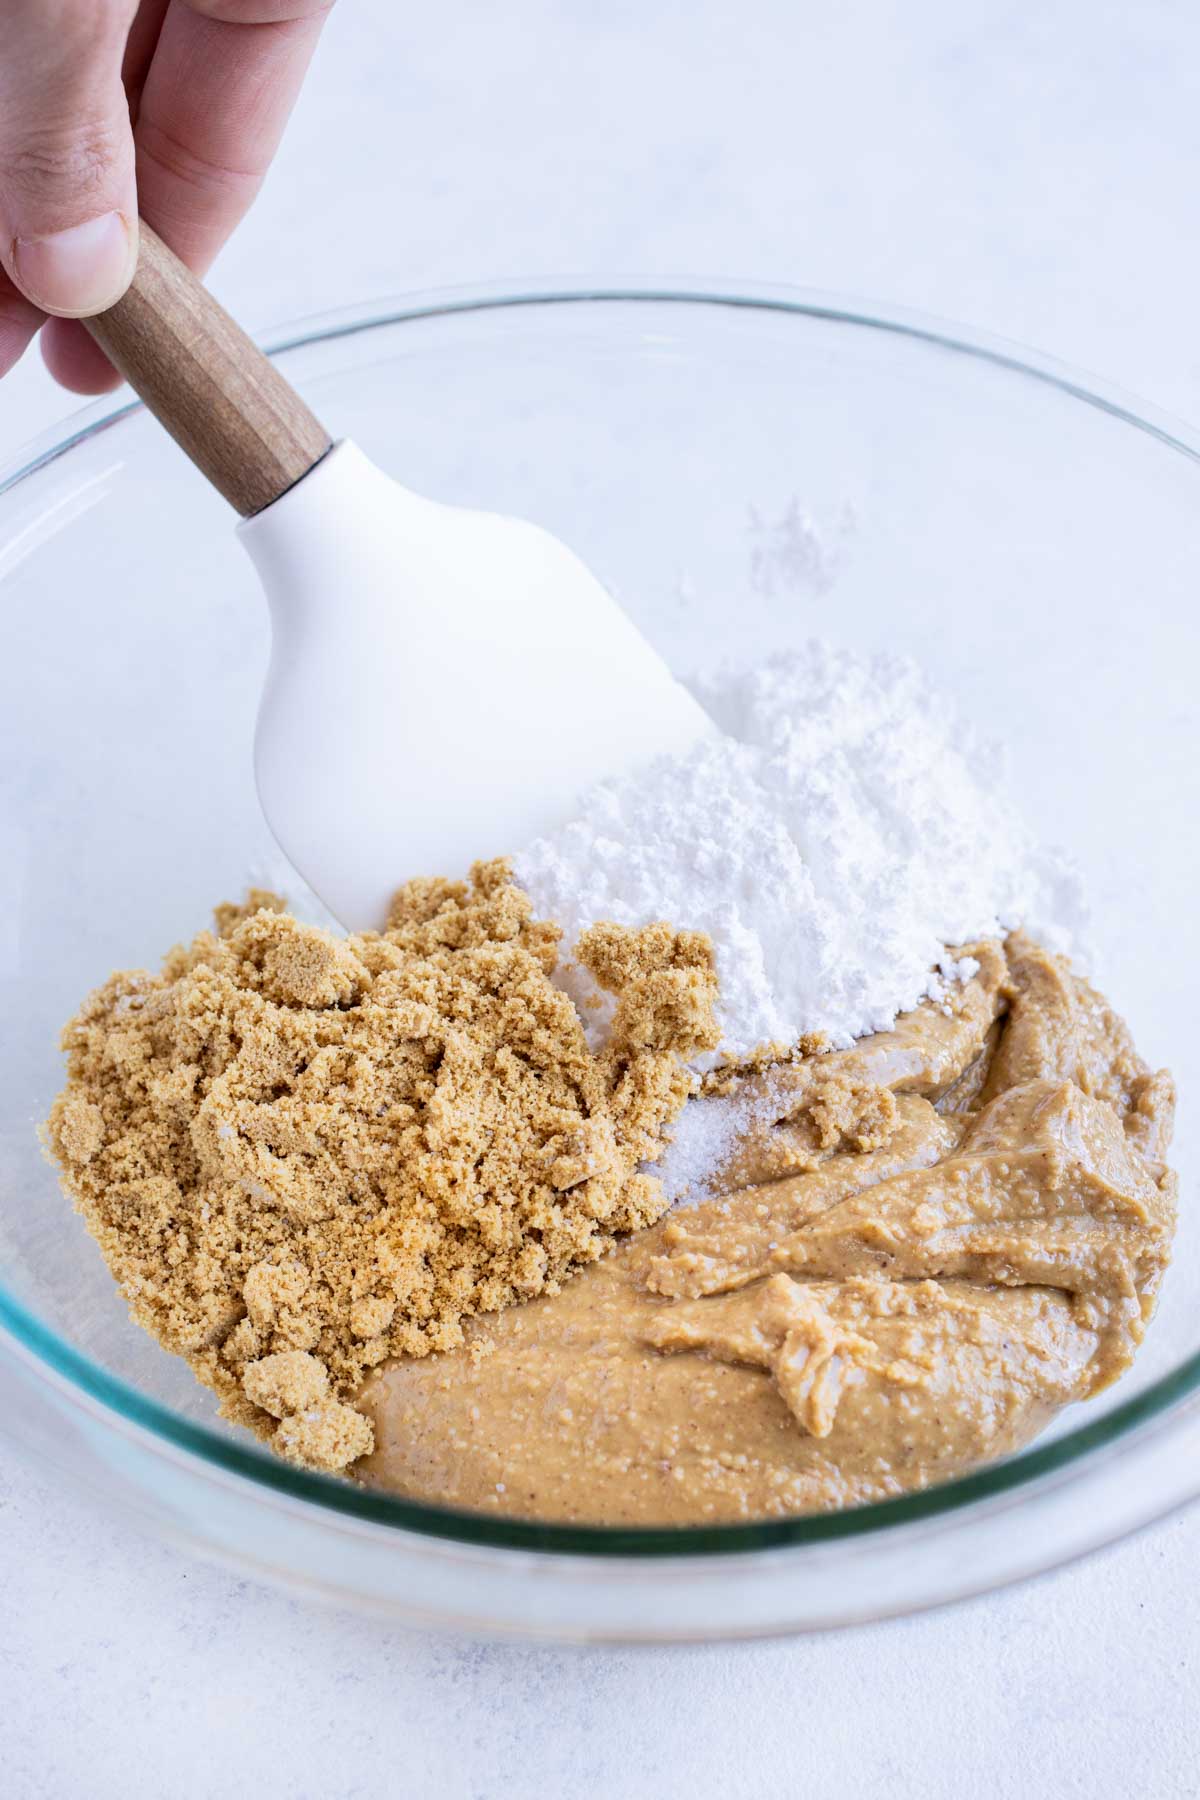 Ground graham crackers, powdered sugar, peanut butter, salt, and vanilla are mixed together.